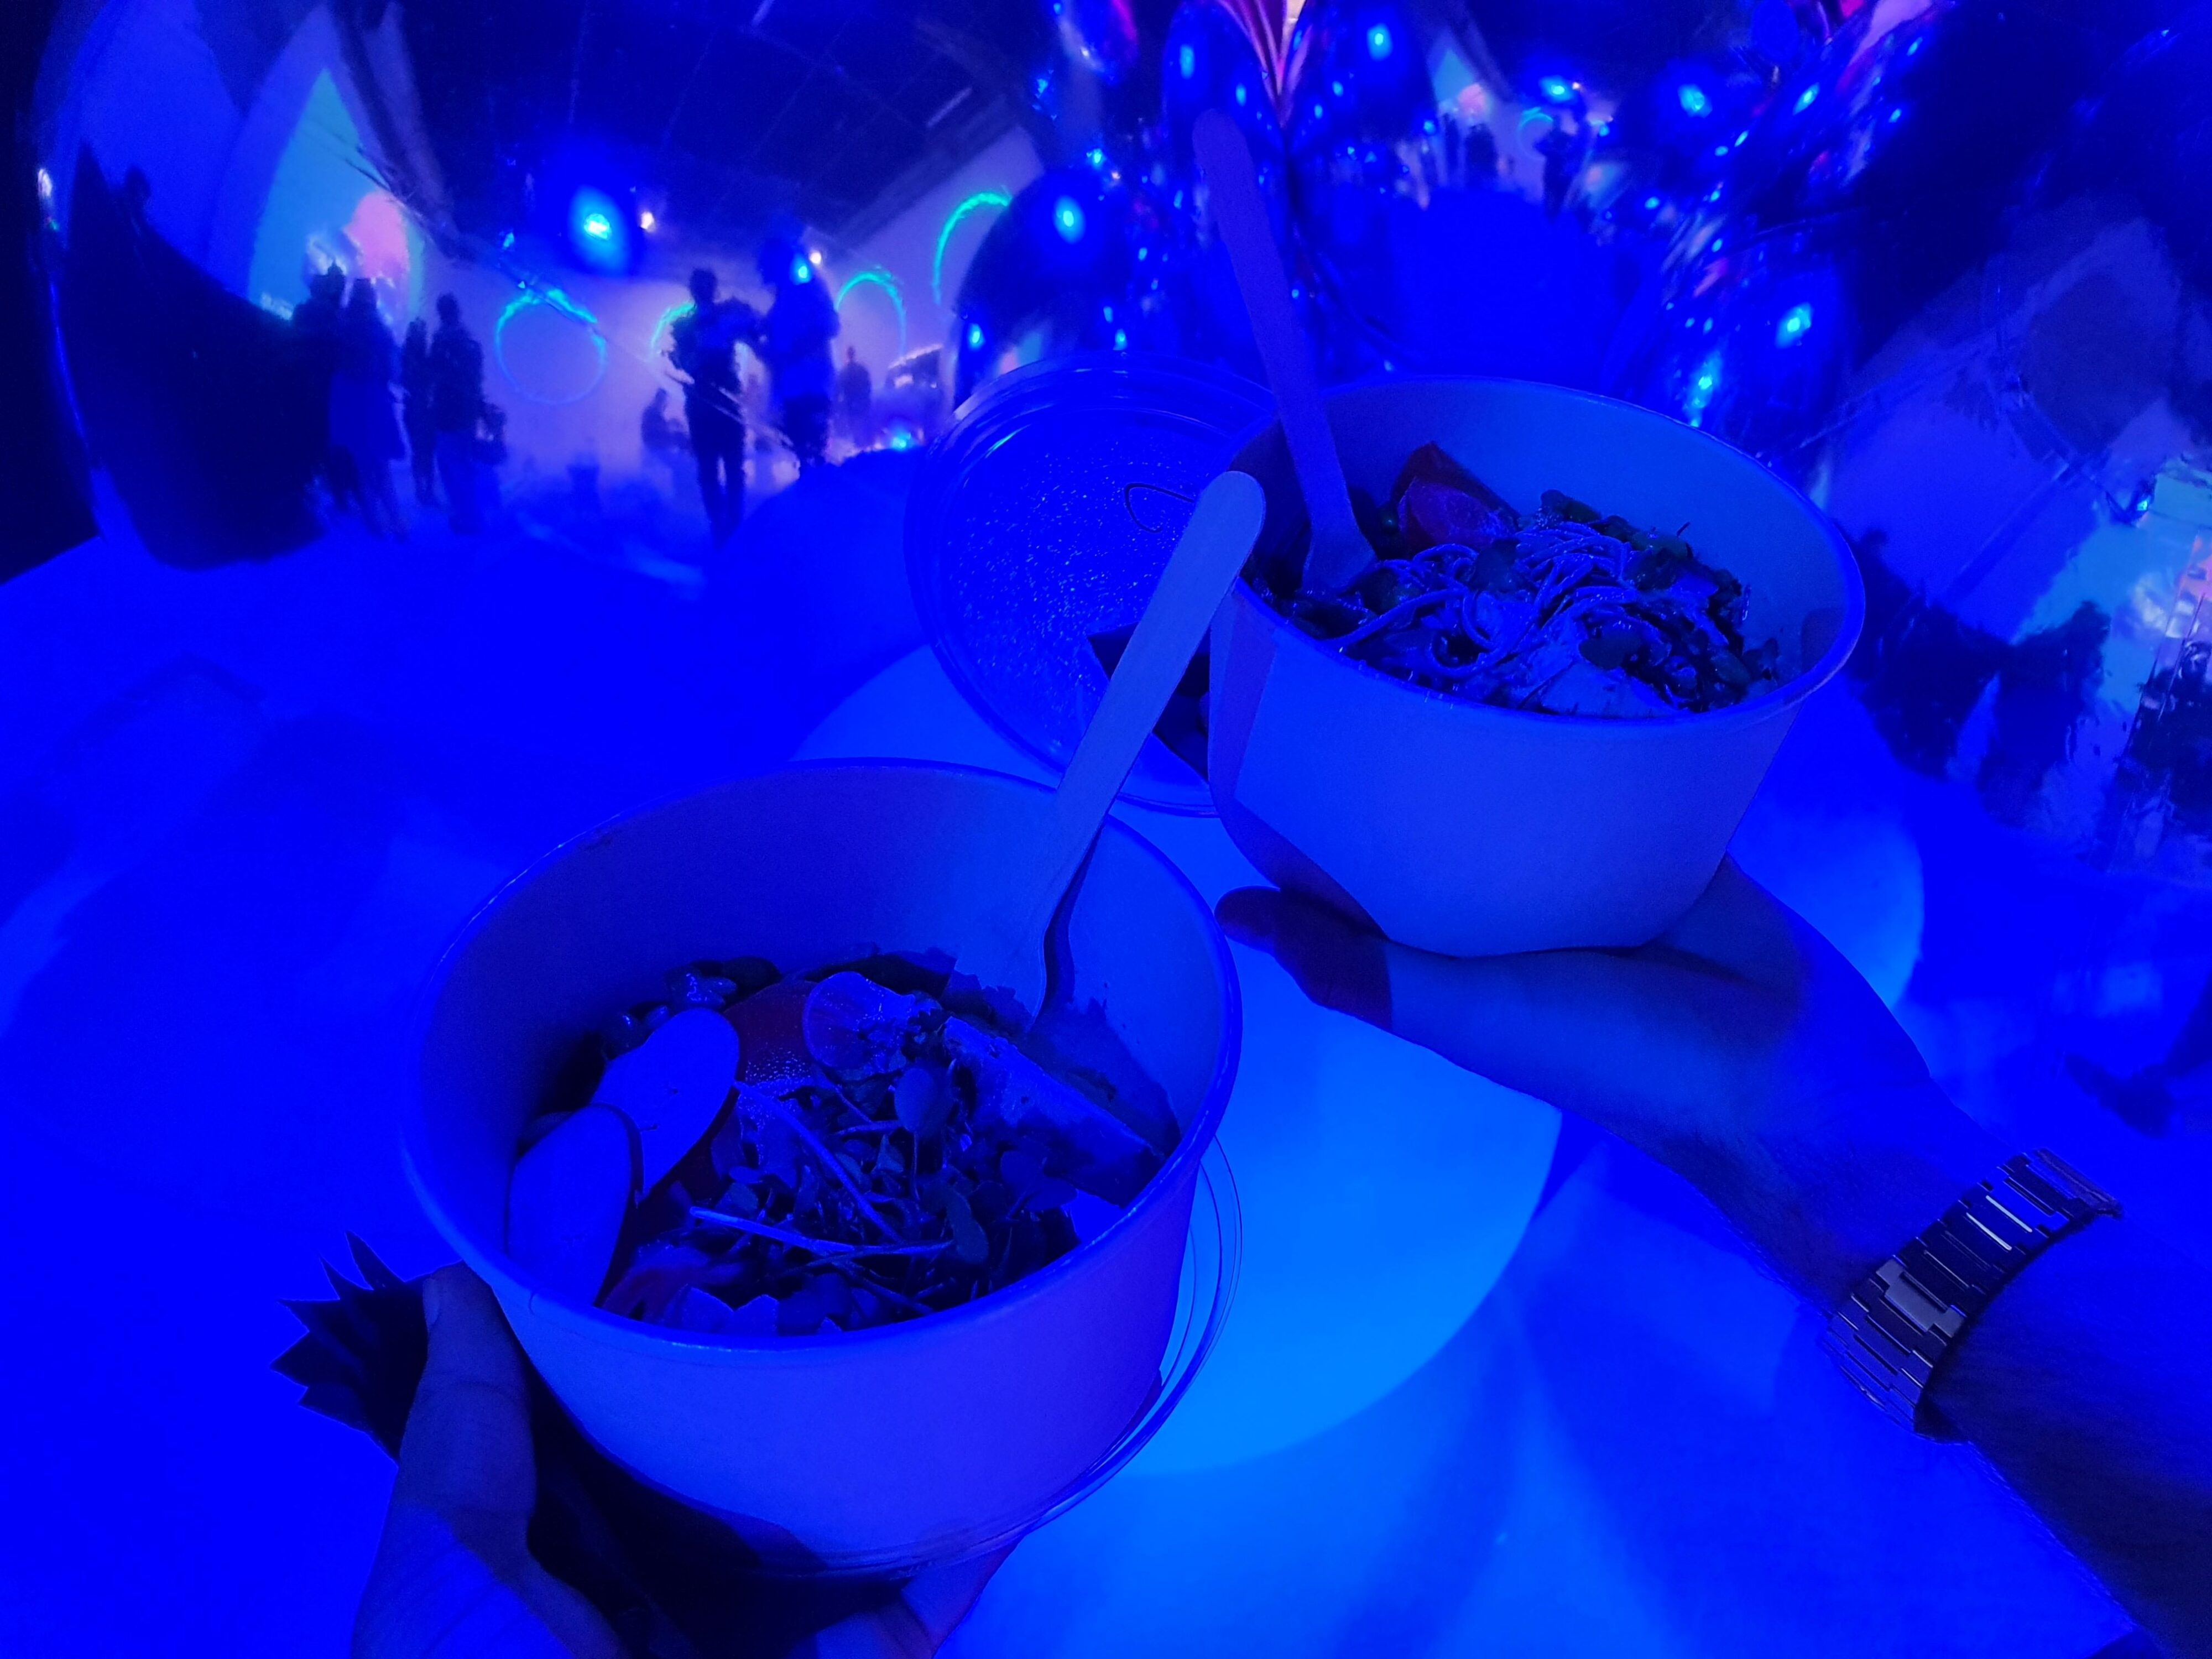 A range of spicy salads were our dinner offering at Mini's sensory experience 2022.